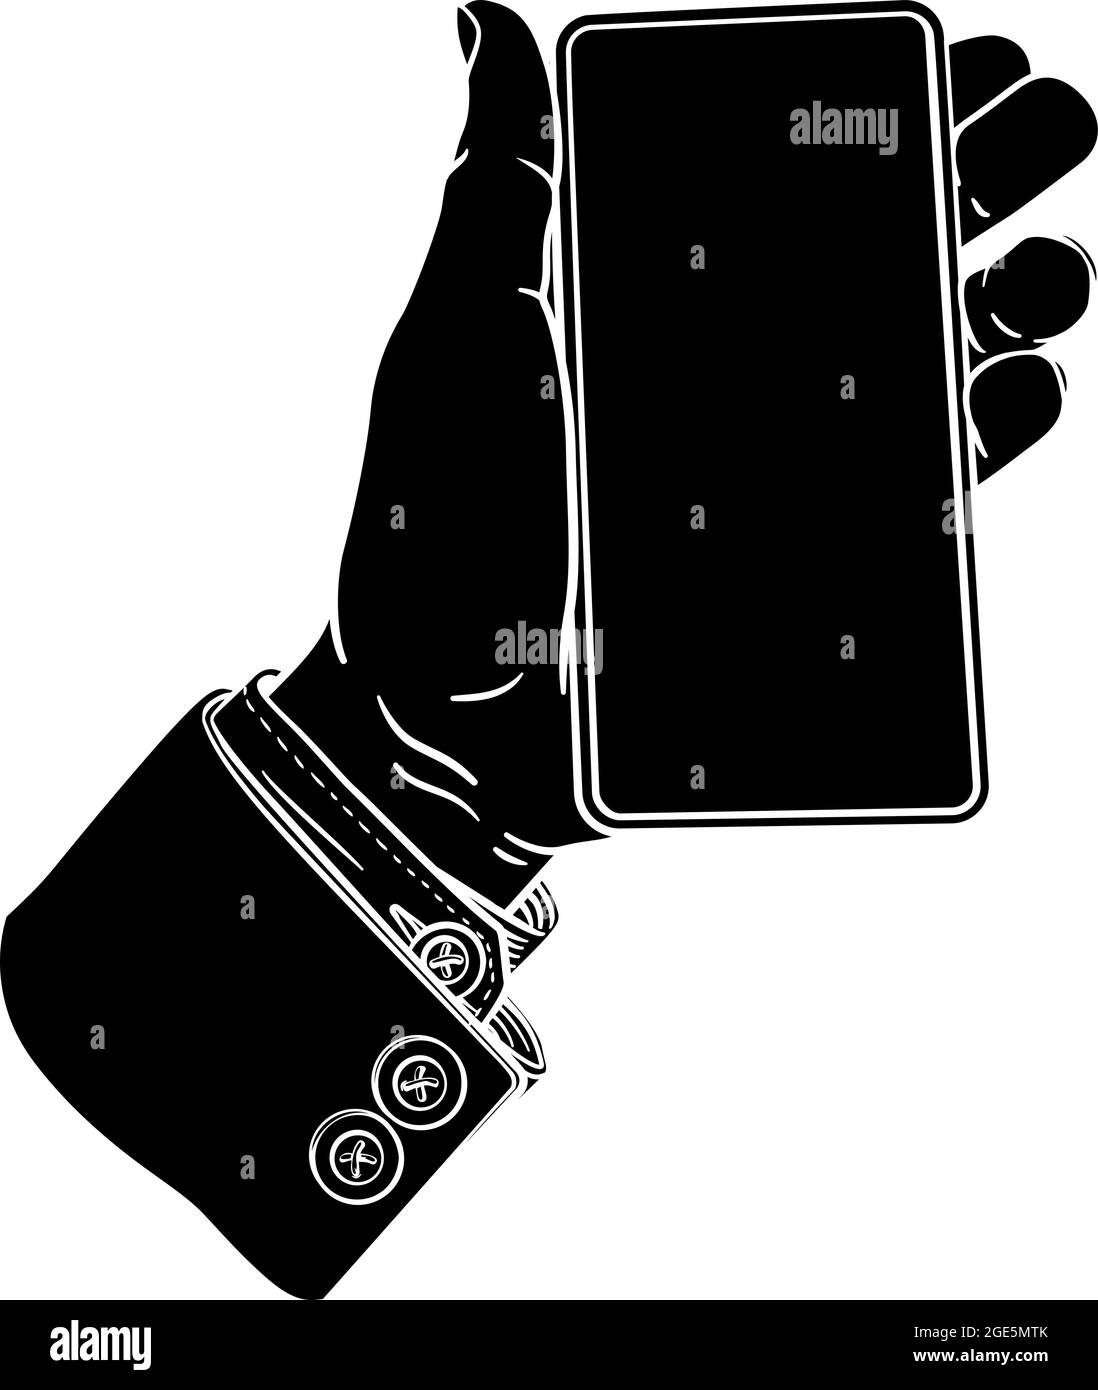 Hand Holding Mobile Phone Vintage Style Stock Vector